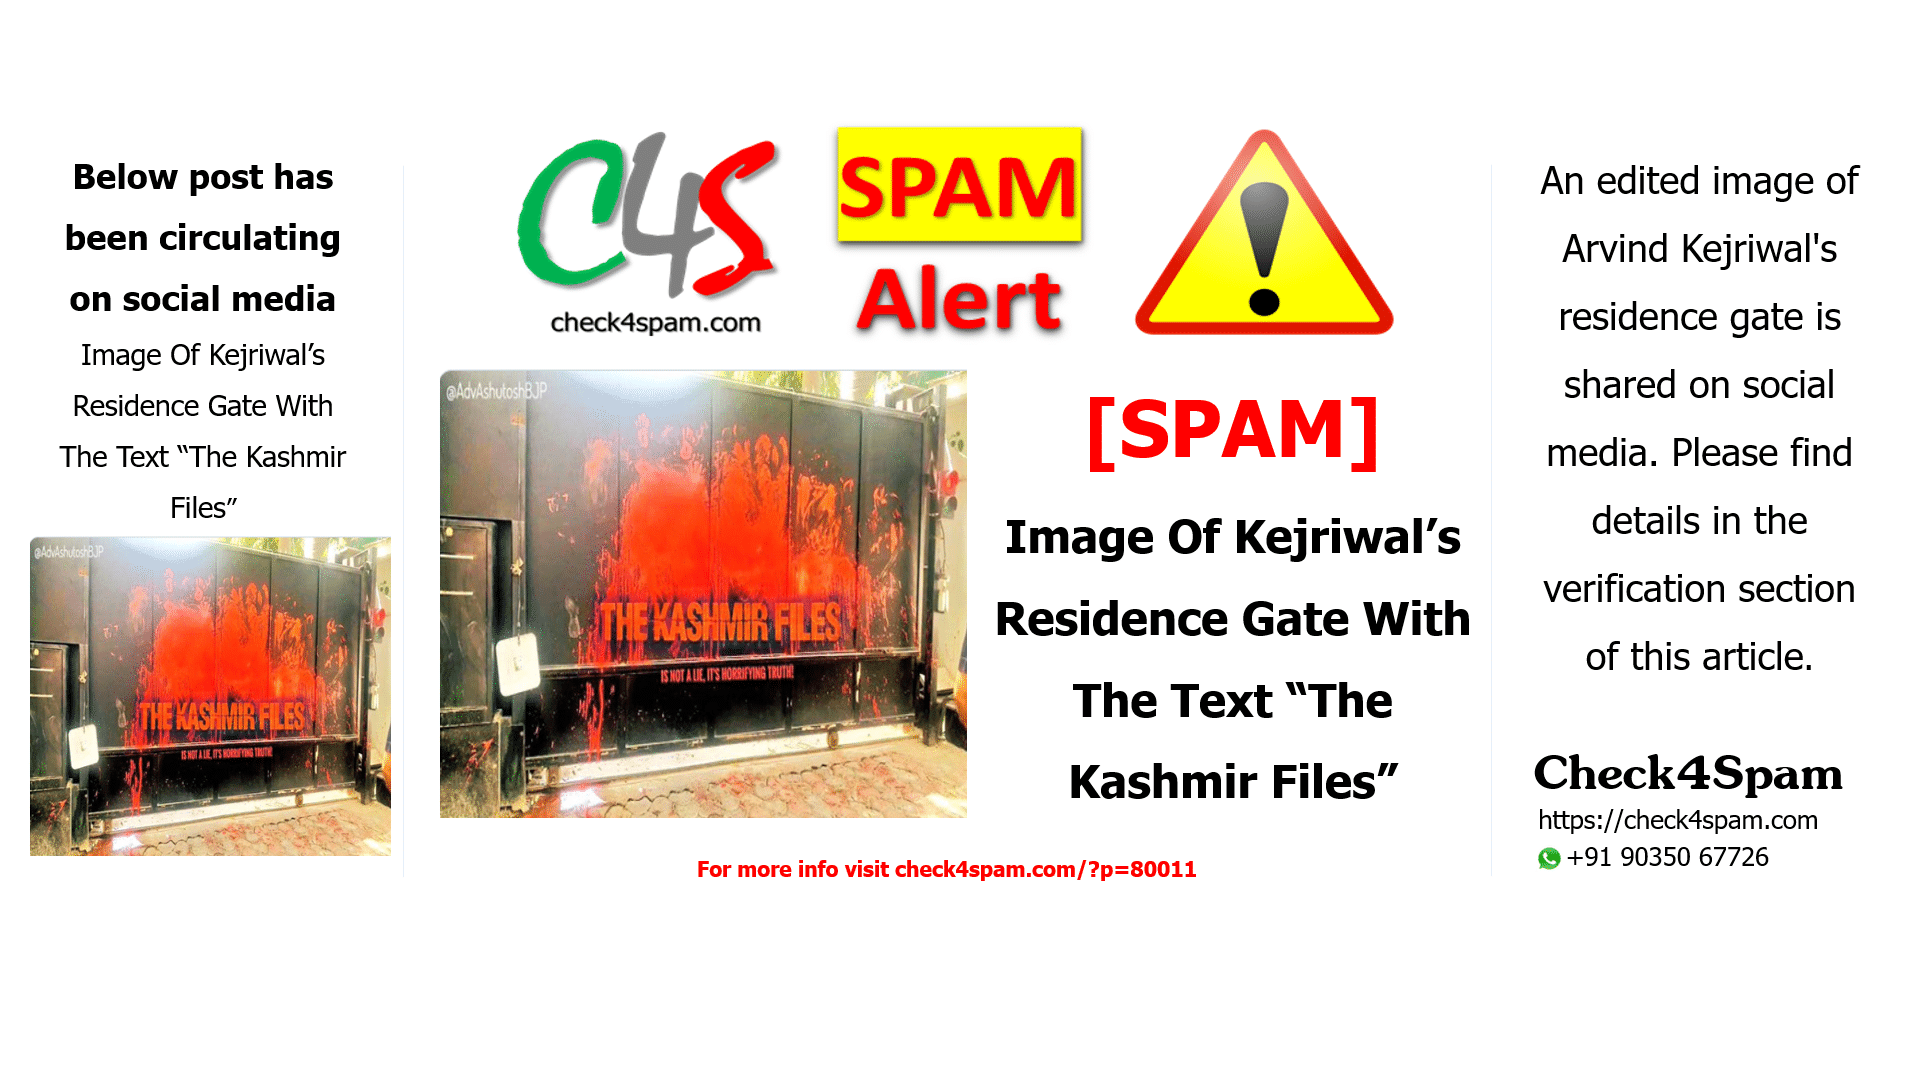 Image Of Kejriwal’s Residence Gate With The Text “The Kashmir Files”